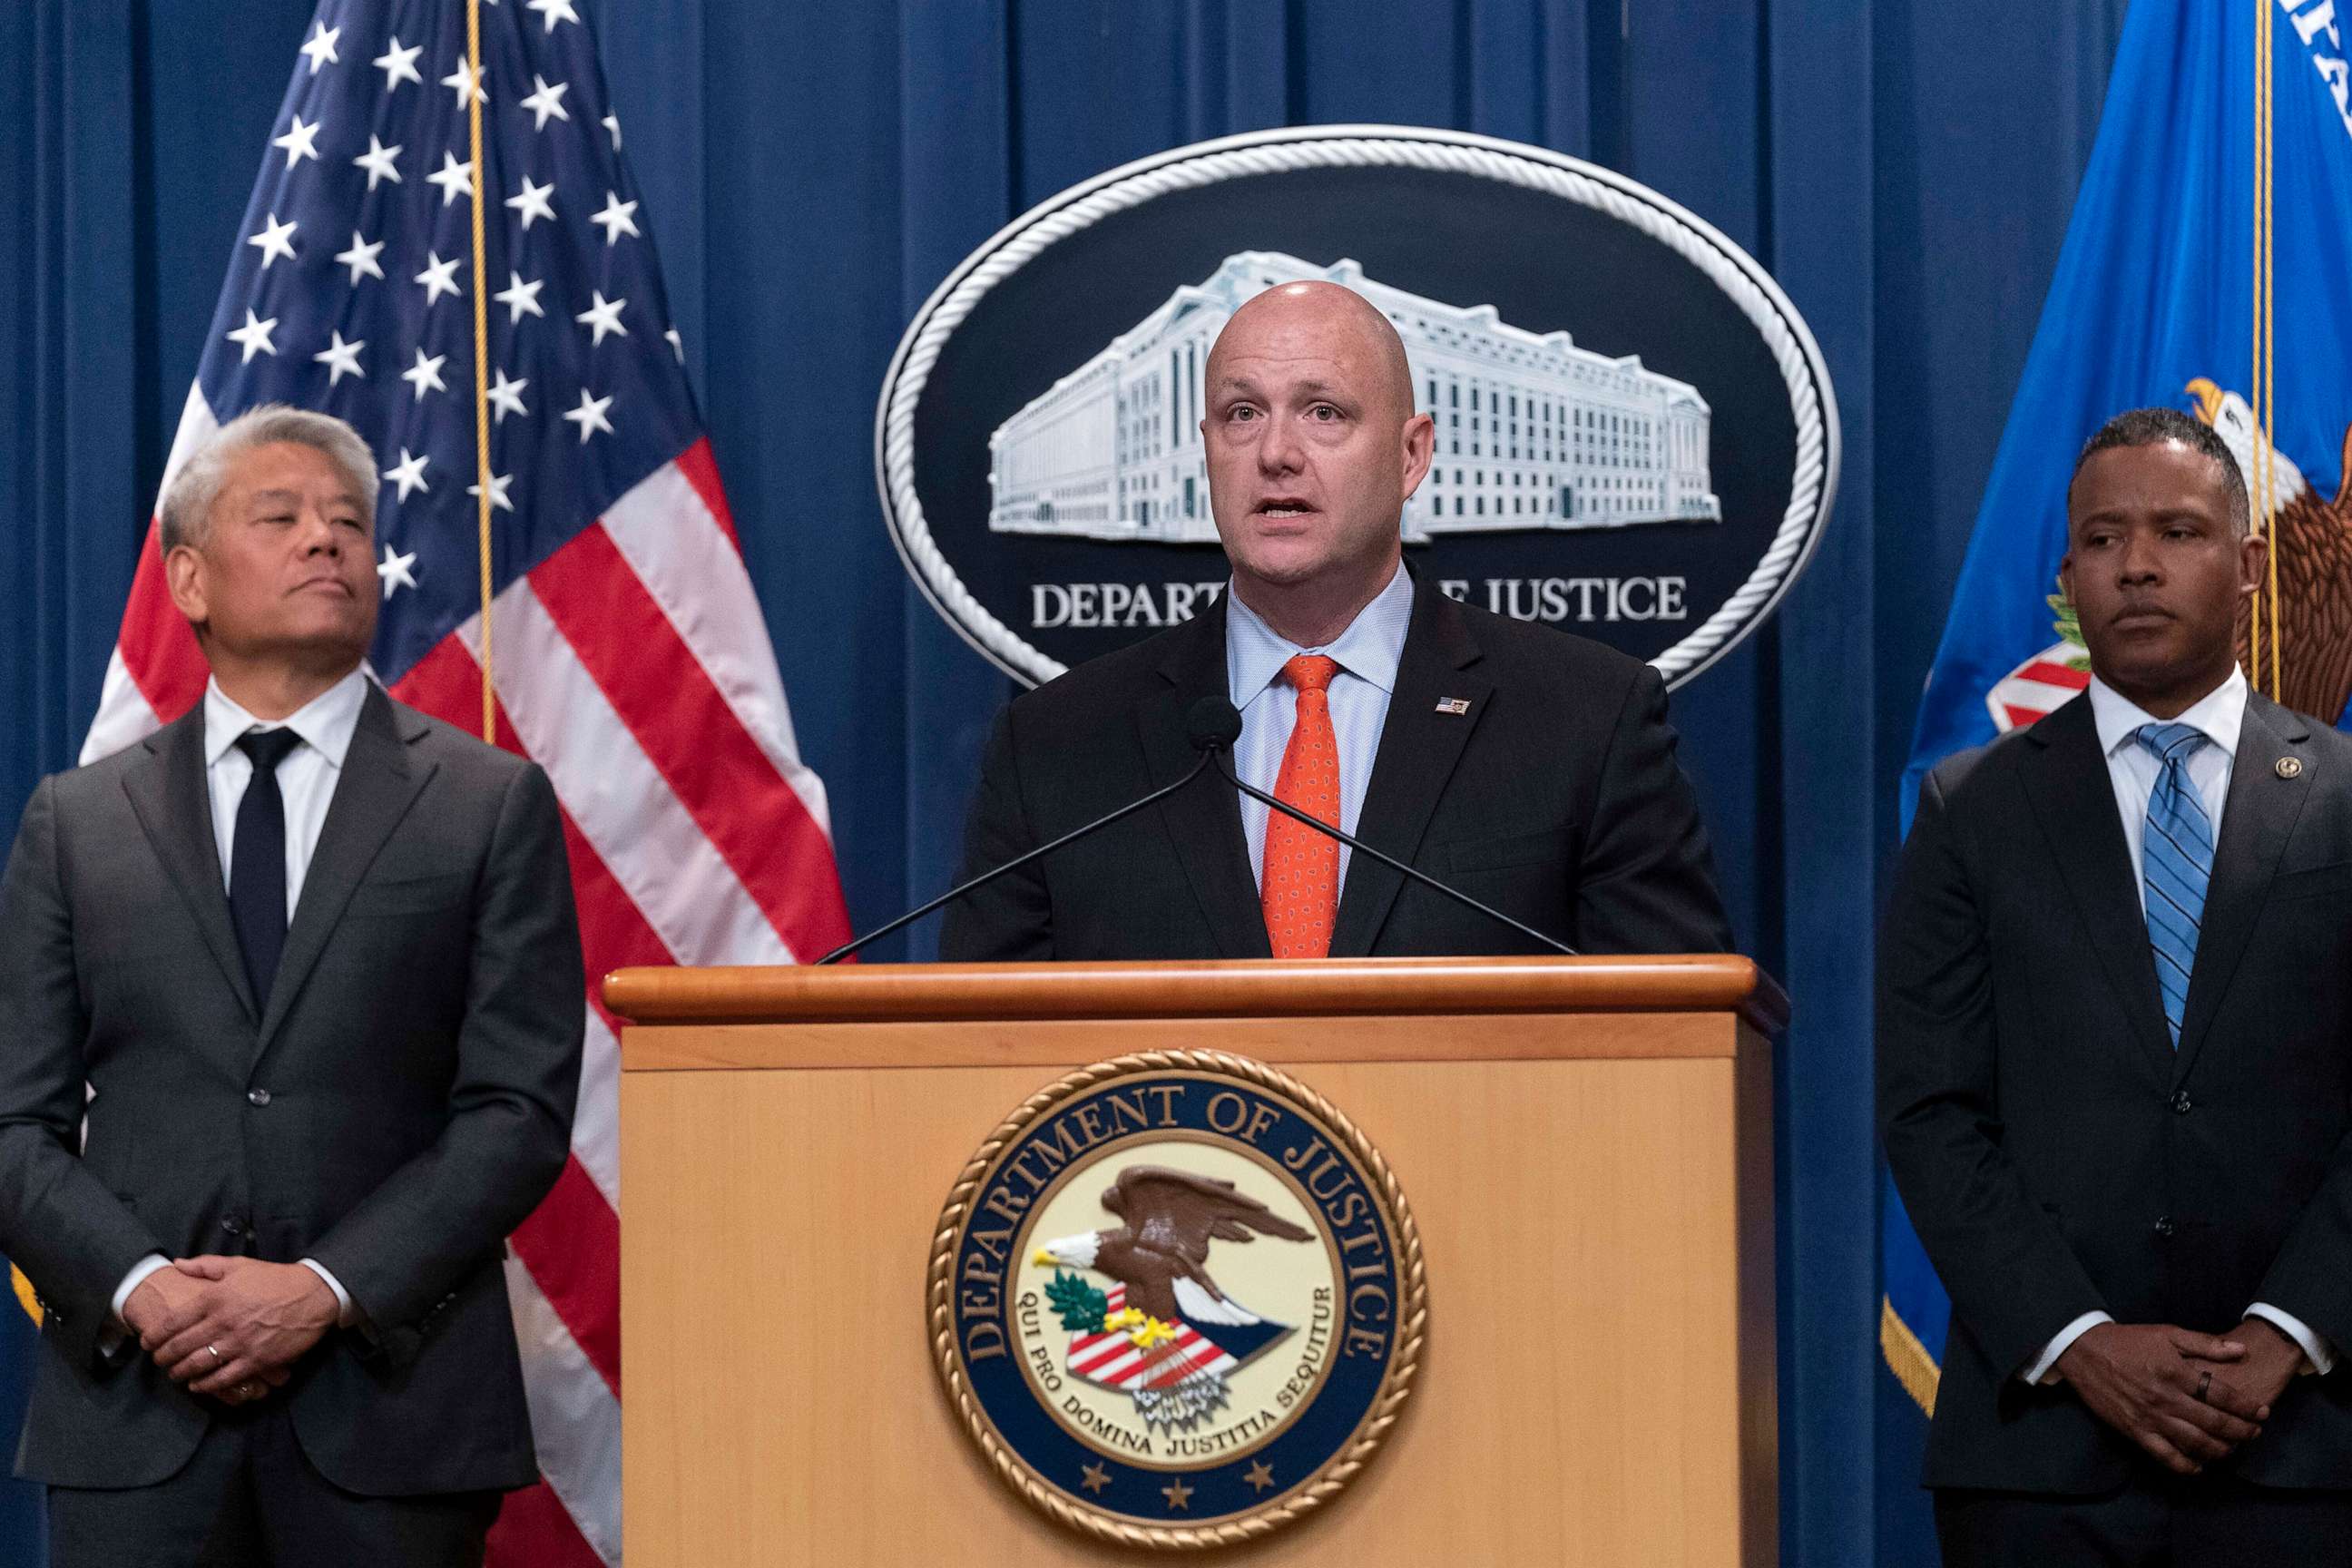 PHOTO: In this Sept. 13, 2022, file photo, U.S. Immigration and Customs Enforcement Acting Deputy Director Patrick J. Lechleitner speaks during a news conference at the Department of Justice in Washington, D.C.